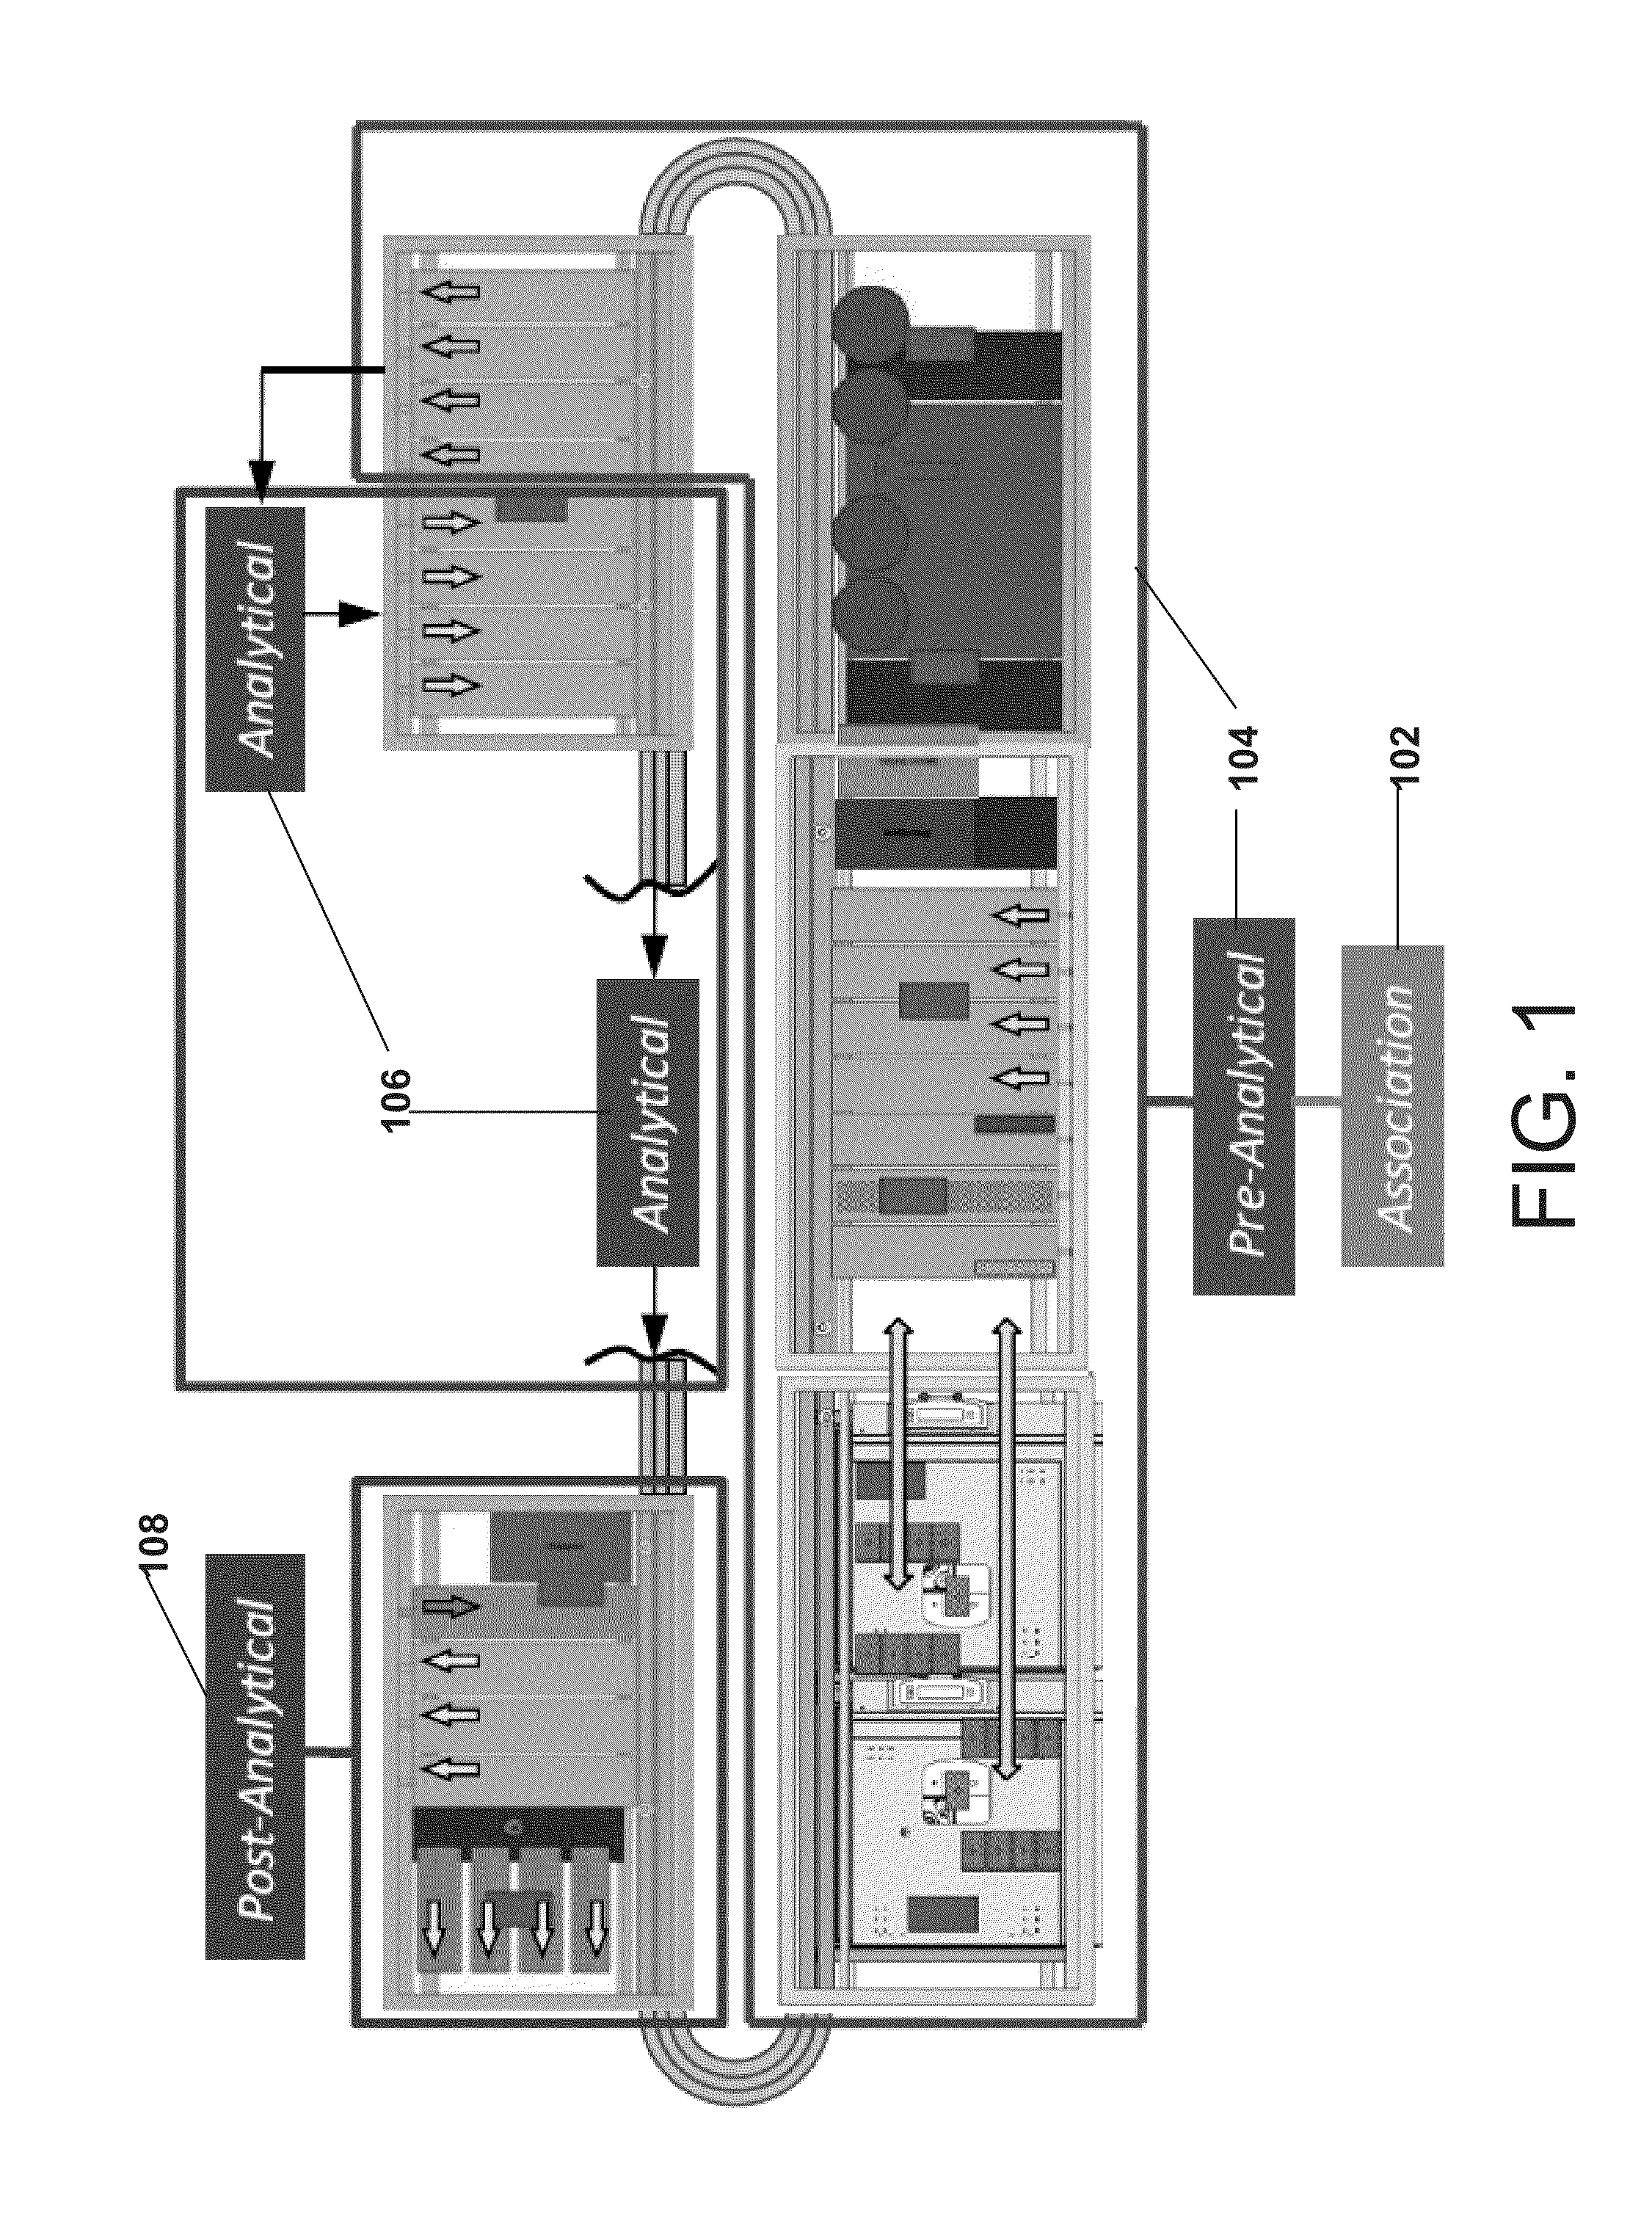 Centrifuge system and workflow